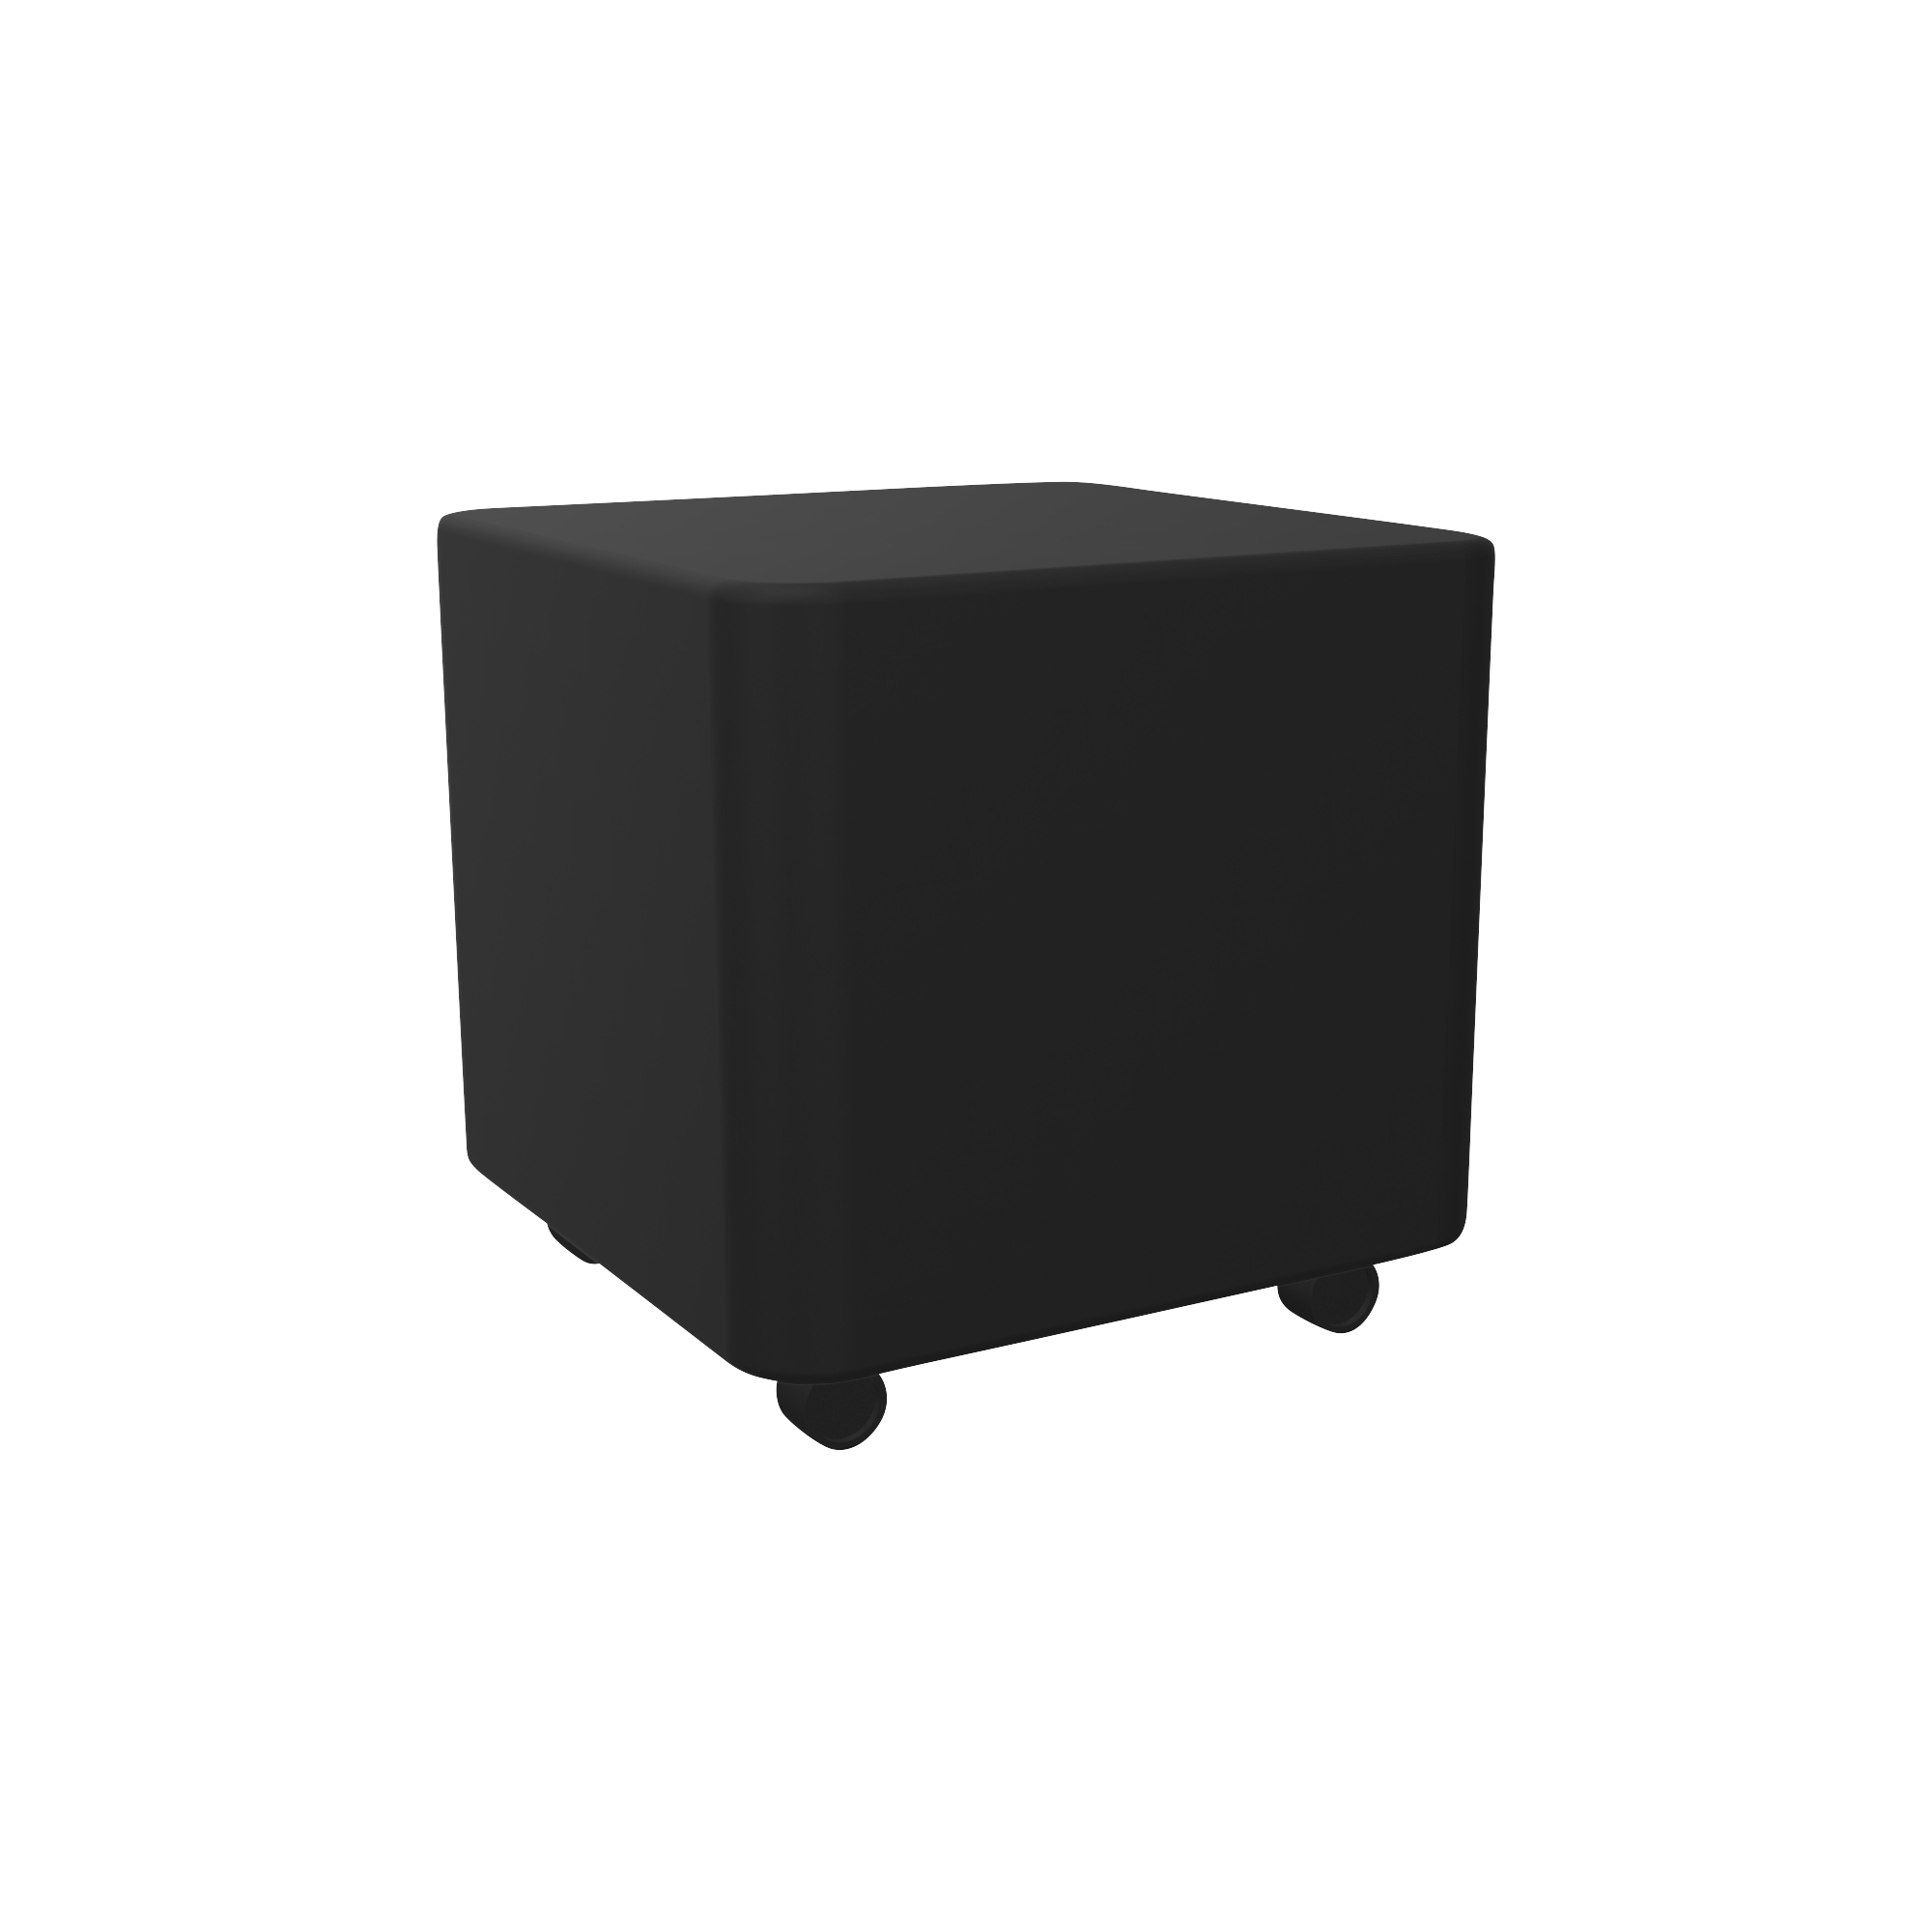 A black cube shaped ottomon with wheels